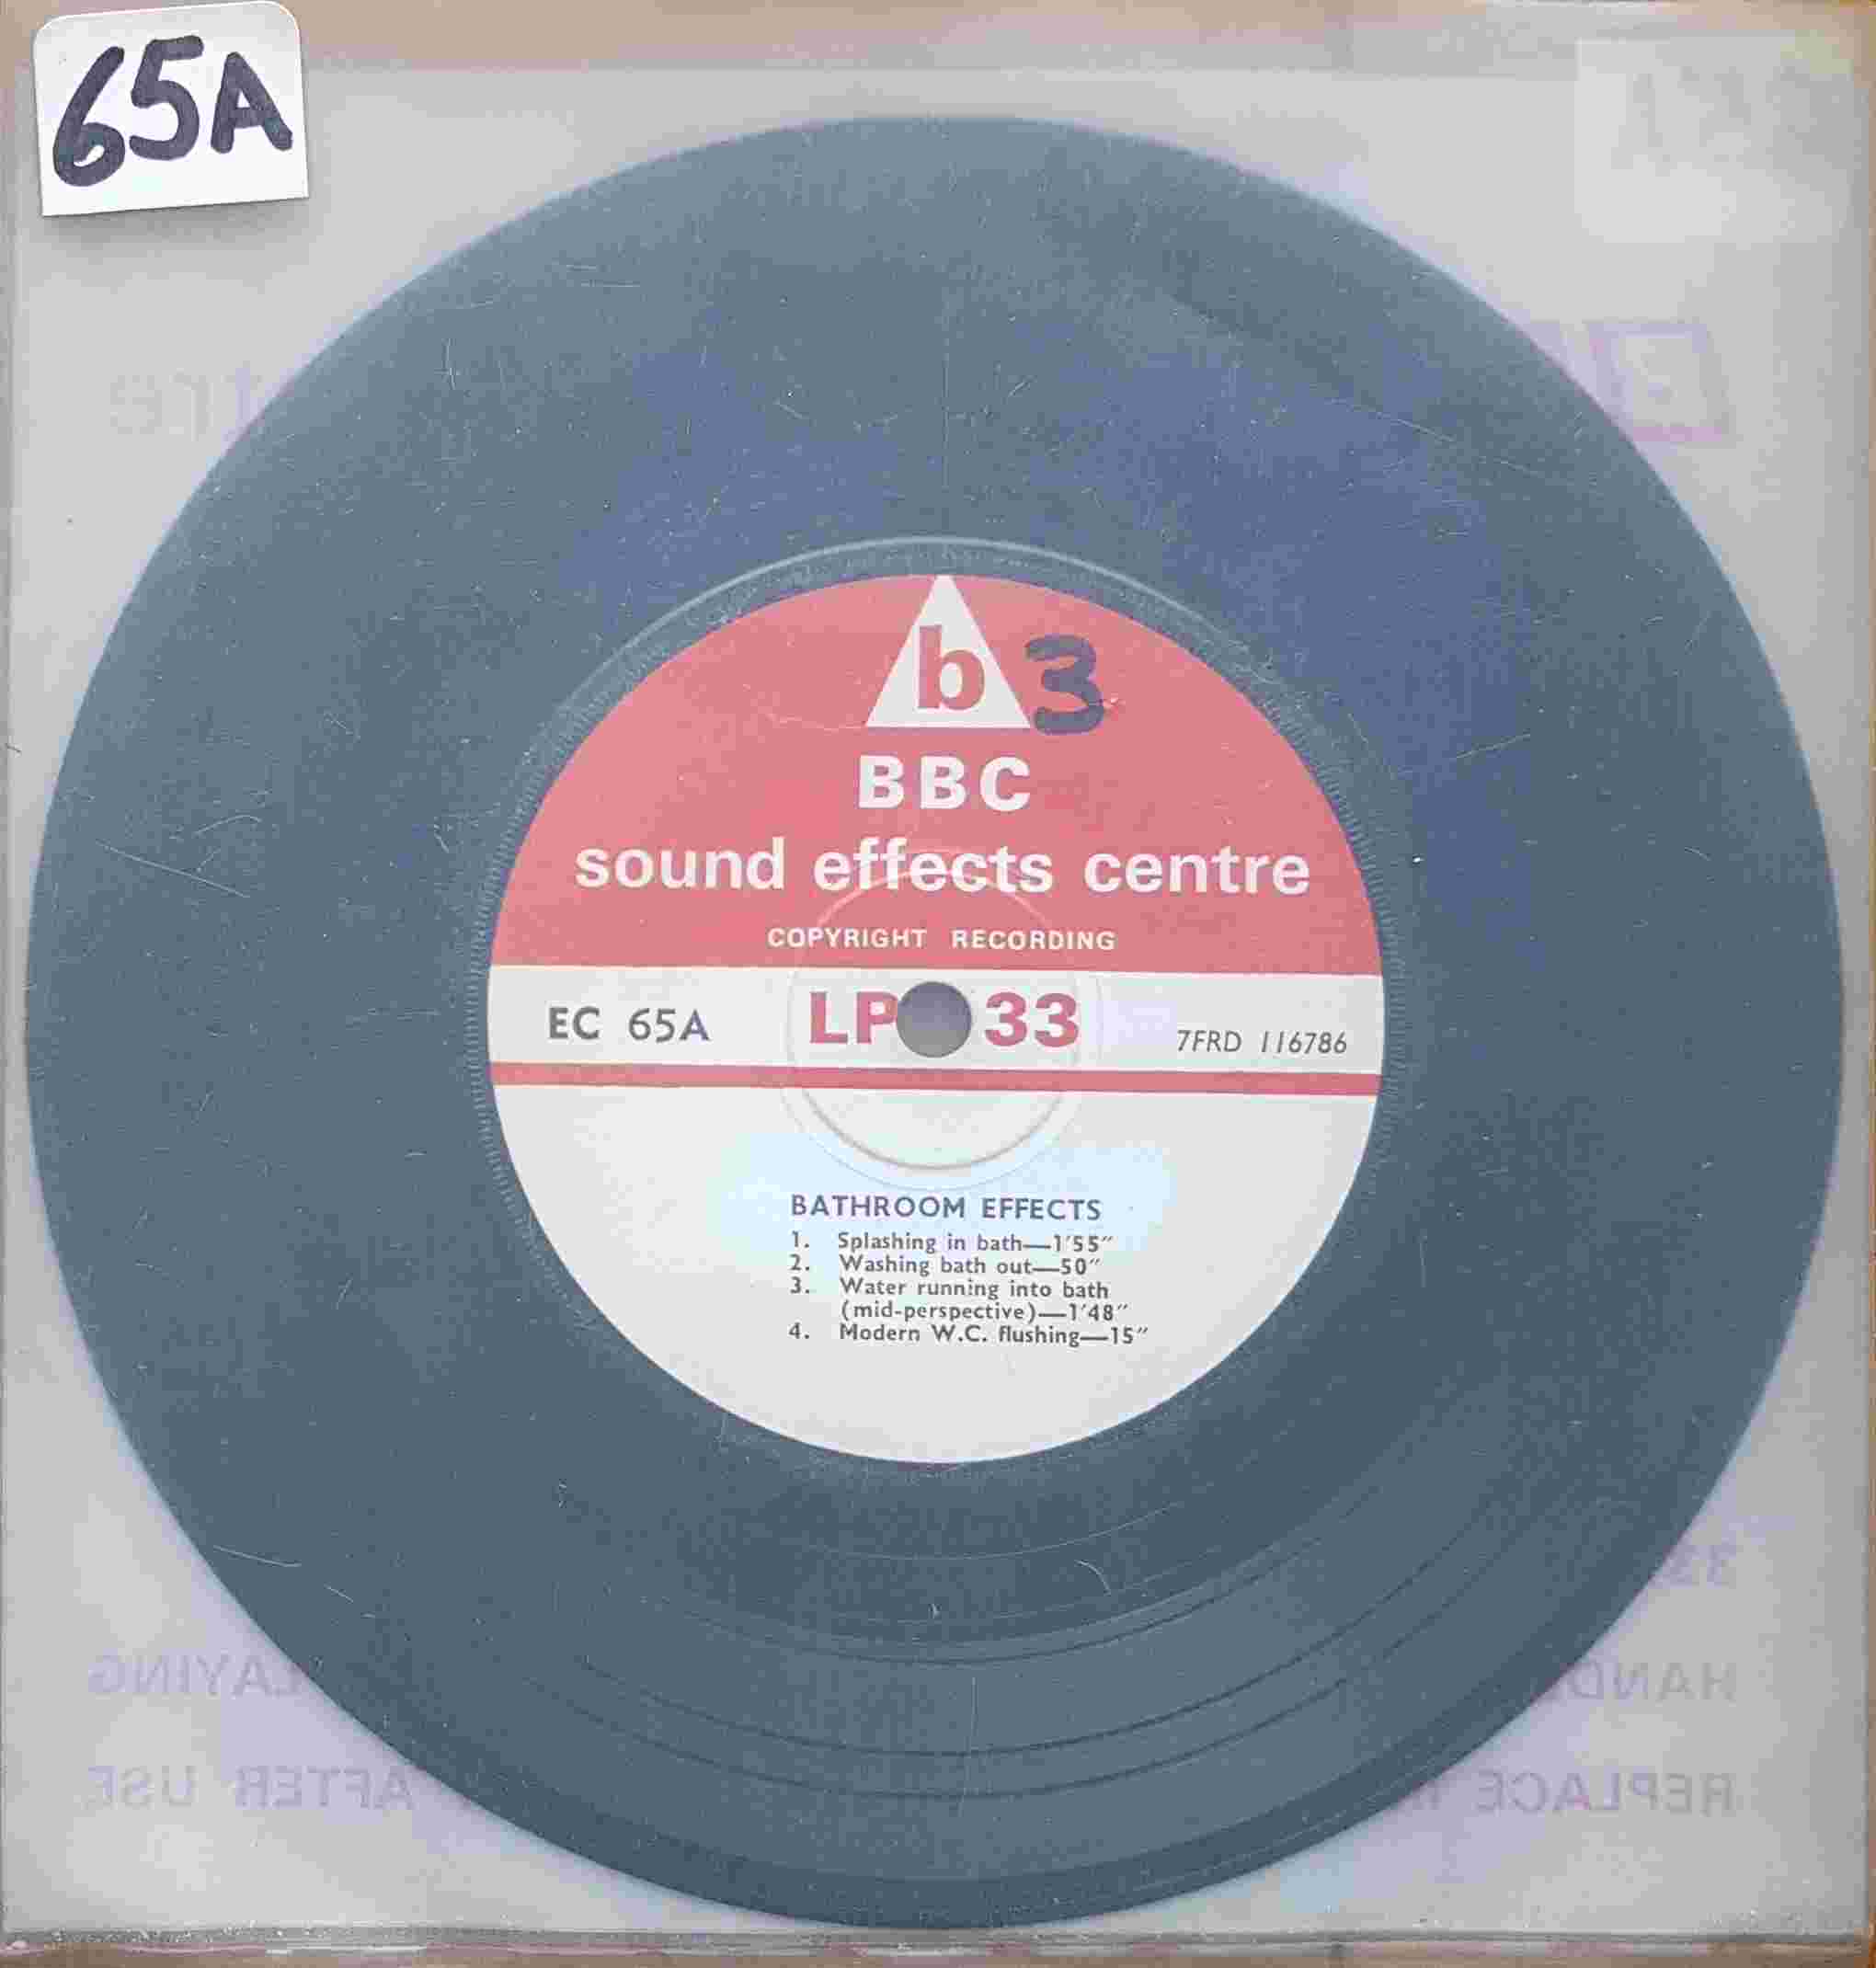 Picture of EC 65A Bathroom effects by artist Not registered from the BBC records and Tapes library